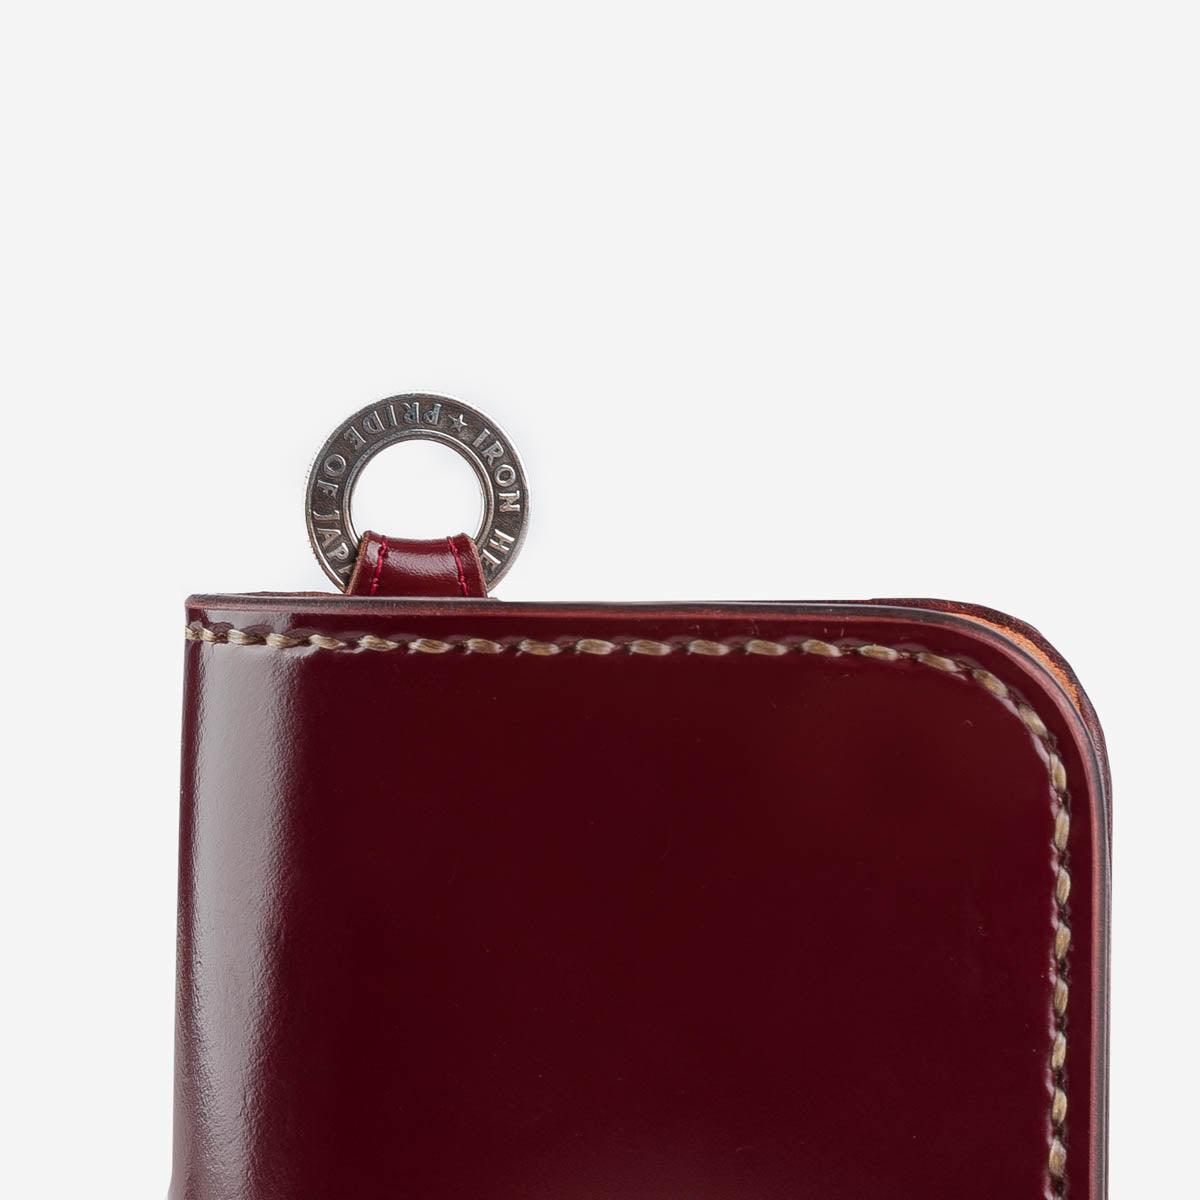 Image showing the IHG-02-OXB - Medium Shell Cordovan Wallet - Oxblood which is a WALLETS AND CHAINS described by the following info Accessories, Iron Heart, Released, WALLETS AND CHAINS and sold on the IRON HEART GERMANY online store